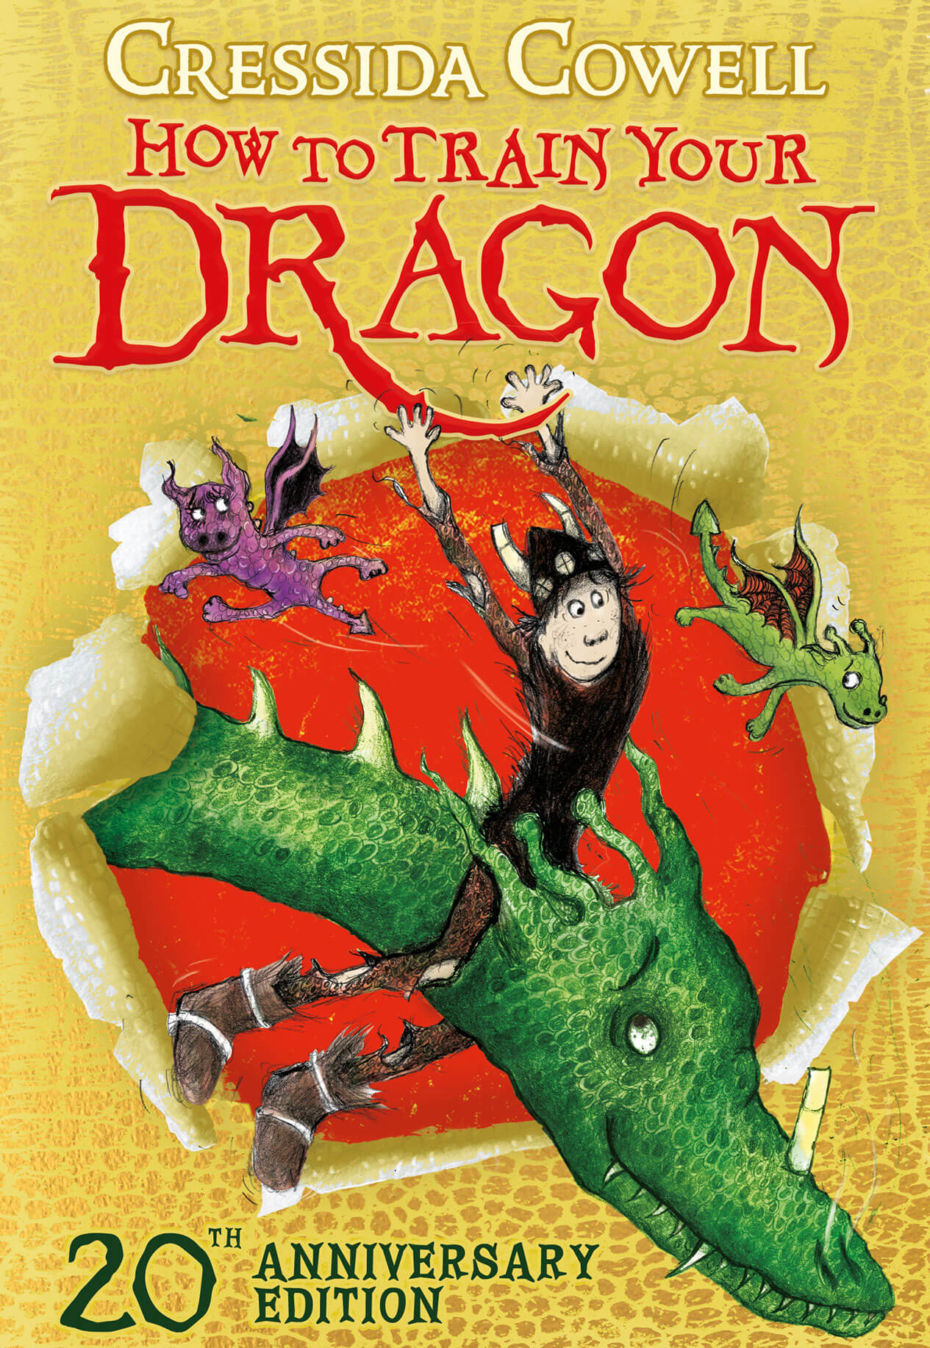 Book jacket for the 20th anniversary special edition of How to train your Dragon by Cressida Cowell